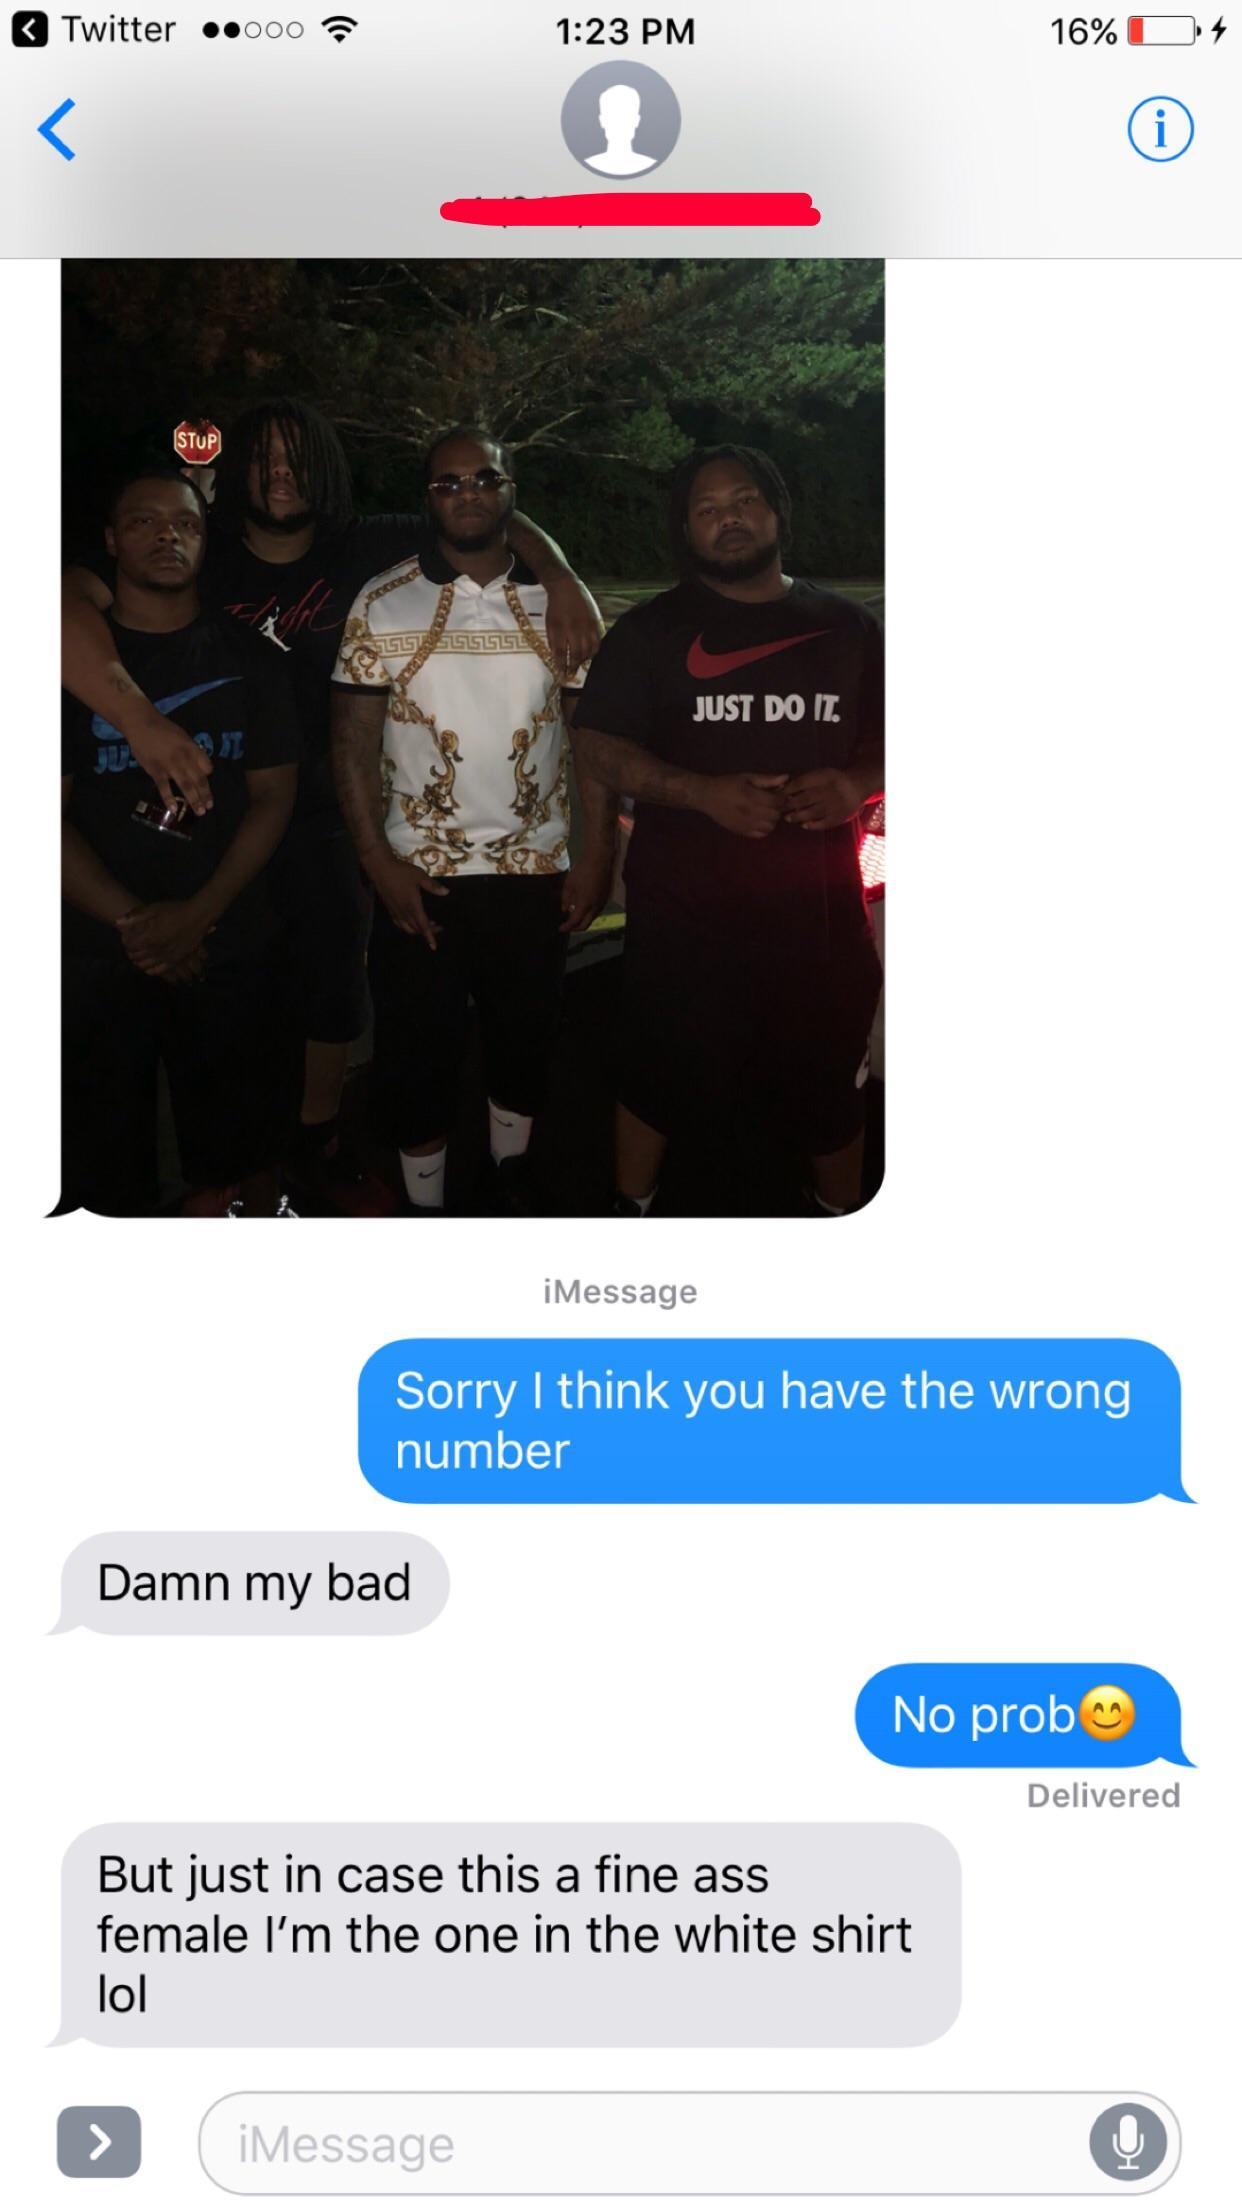 wrong number gf crying meme - Twitter .000 16%D04 Stup Ggs Llslsl Just Do It. iMessage Sorry I think you have the wrong number Damn my bad No prob Delivered But just in case this a fine ass female I'm the one in the white shirt lol iMessage